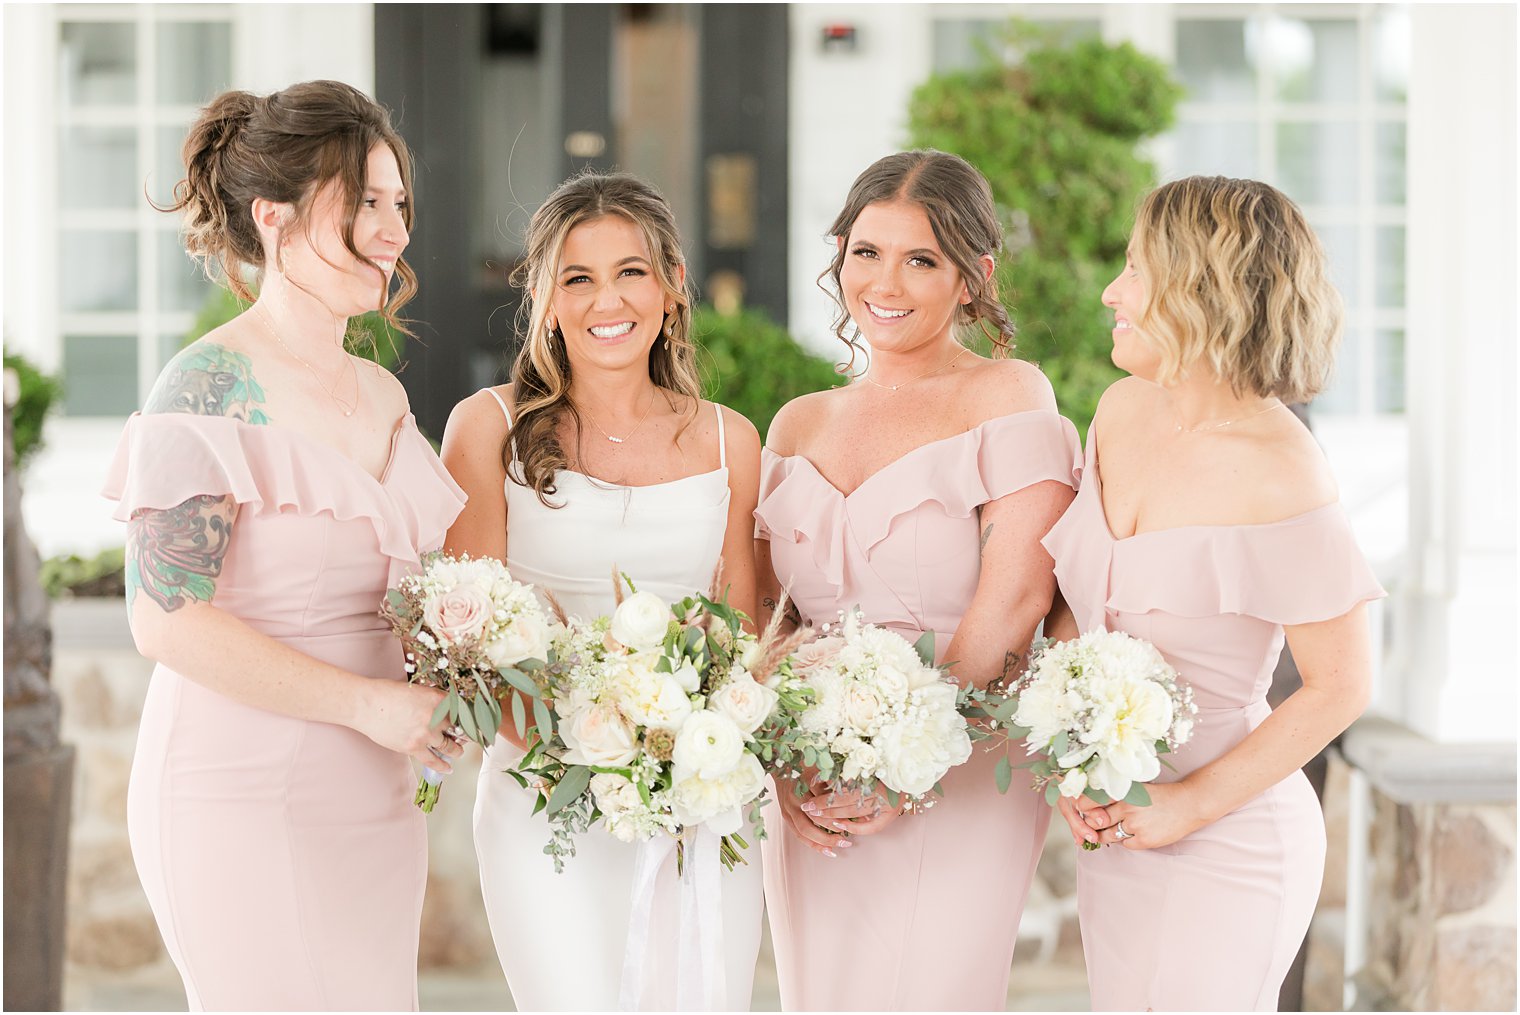 bridesmaids in pink dresses hold white bouquets smiling with bride